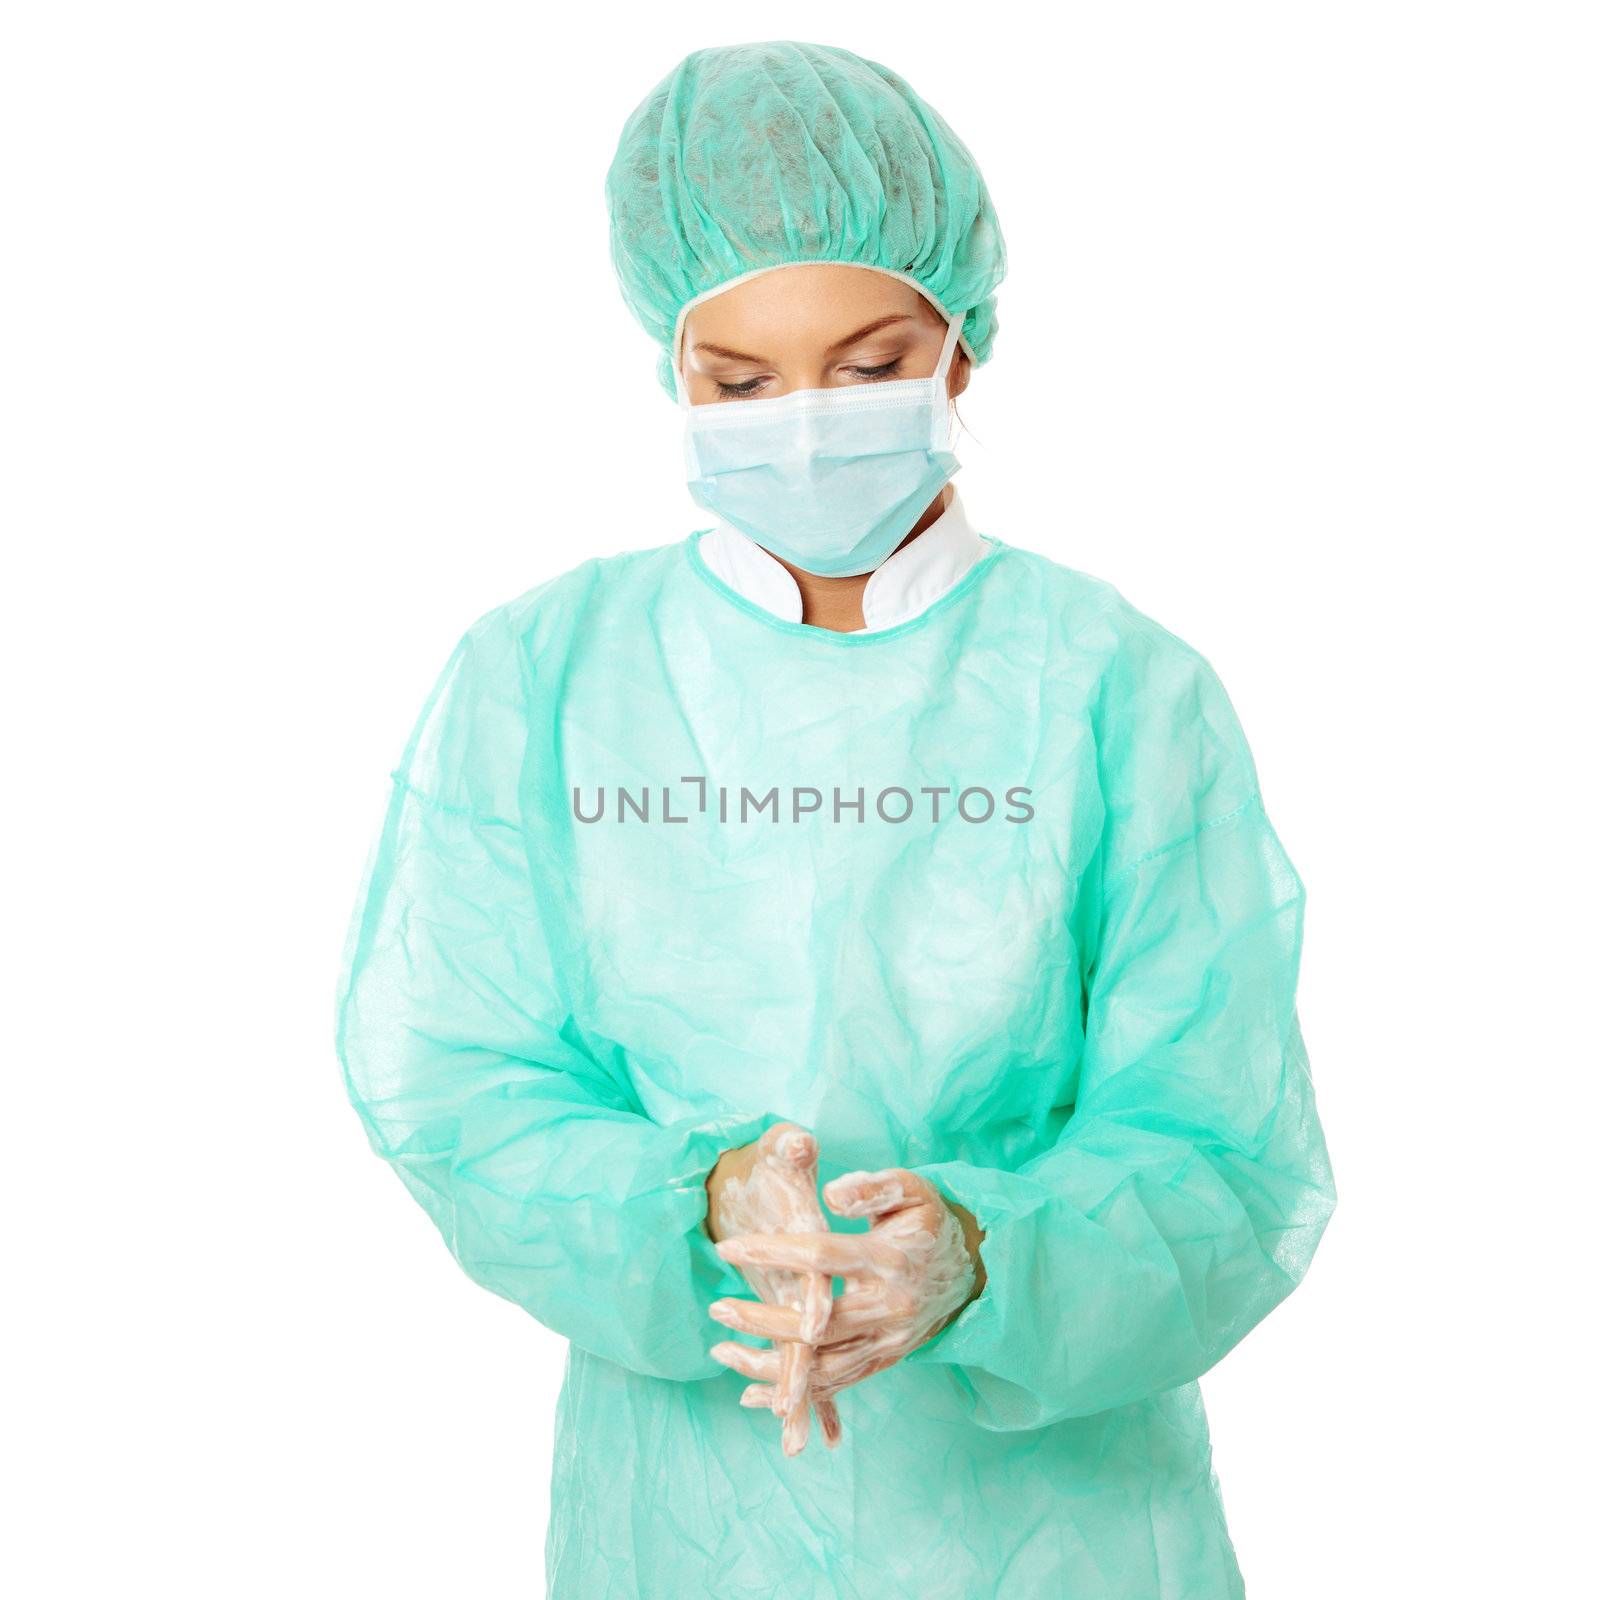 Female surgeon washing her hands, isolated on white